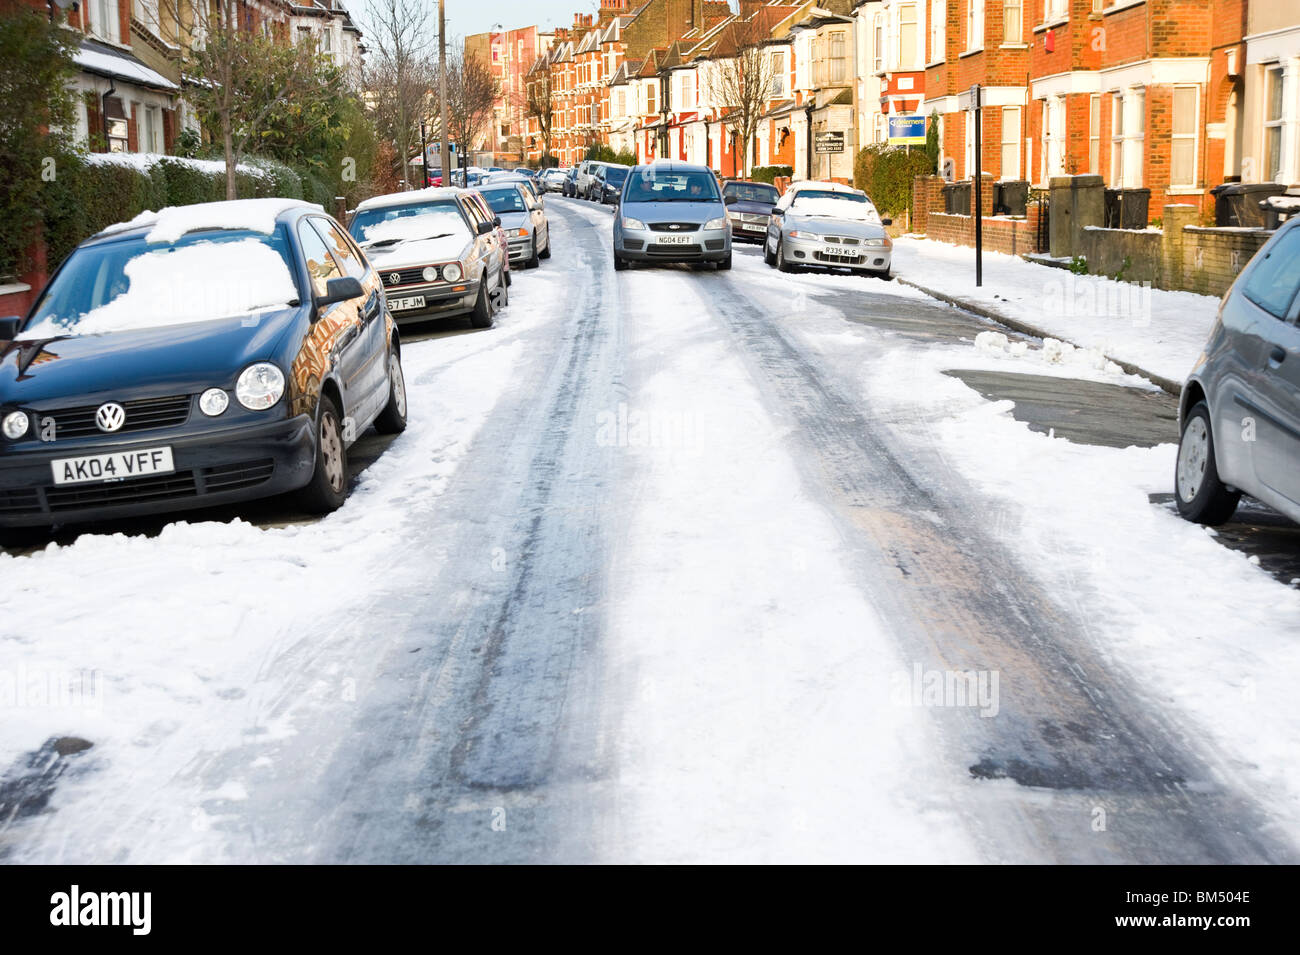 Icy ungritted Road, London, England, Regno Unito Foto Stock